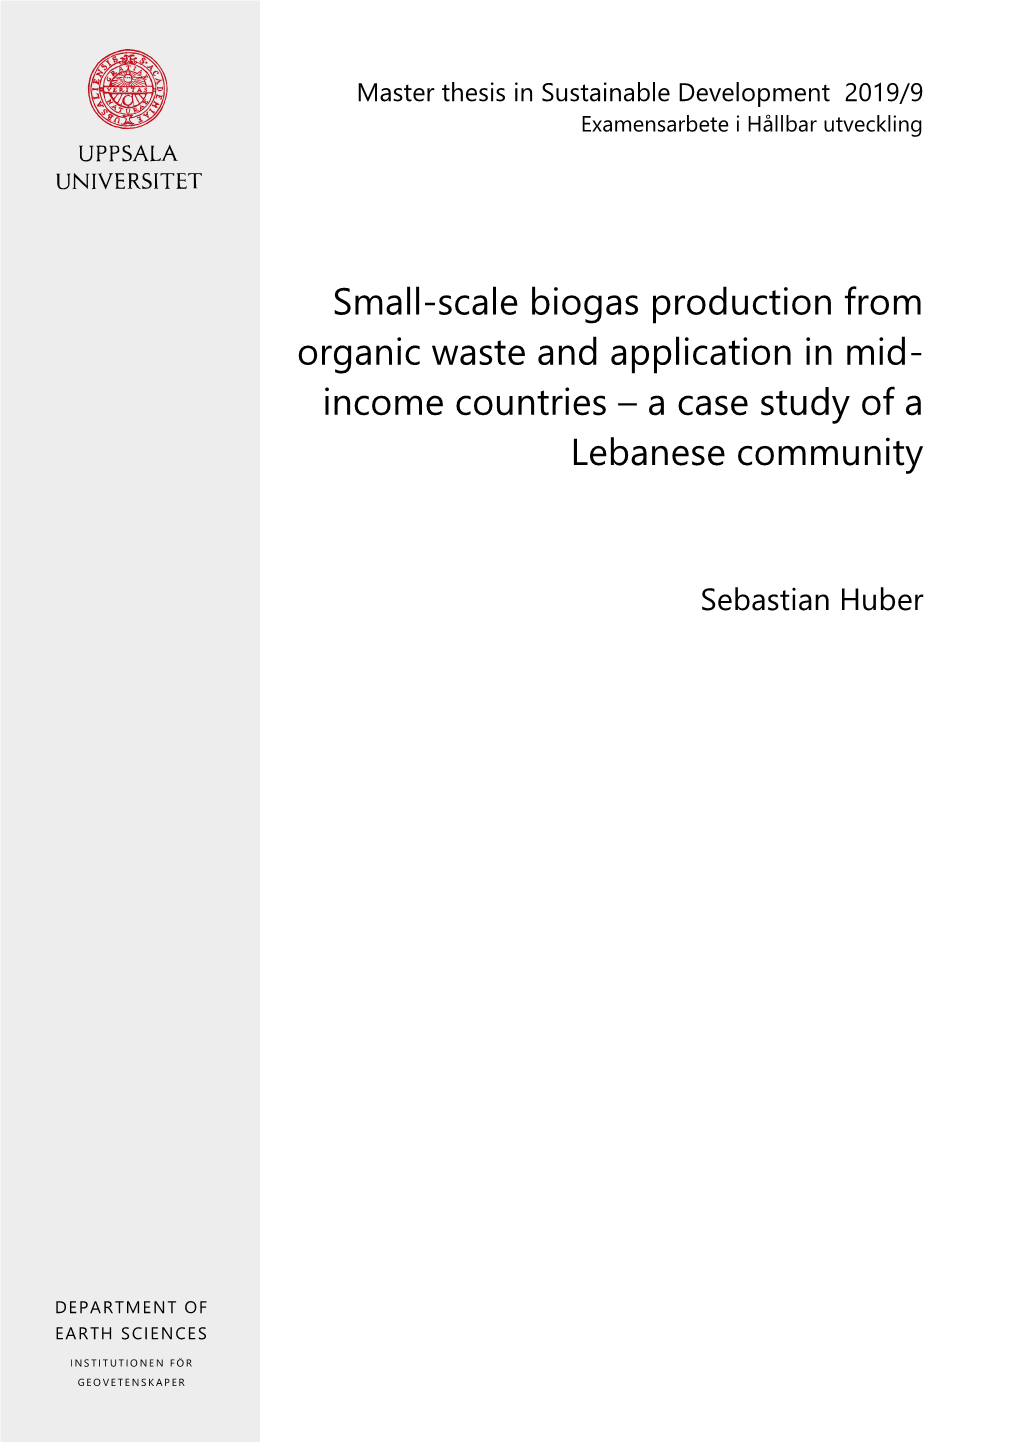 Small-Scale Biogas Production from Organic Waste and Application in Mid- Income Countries – a Case Study of a Lebanese Community